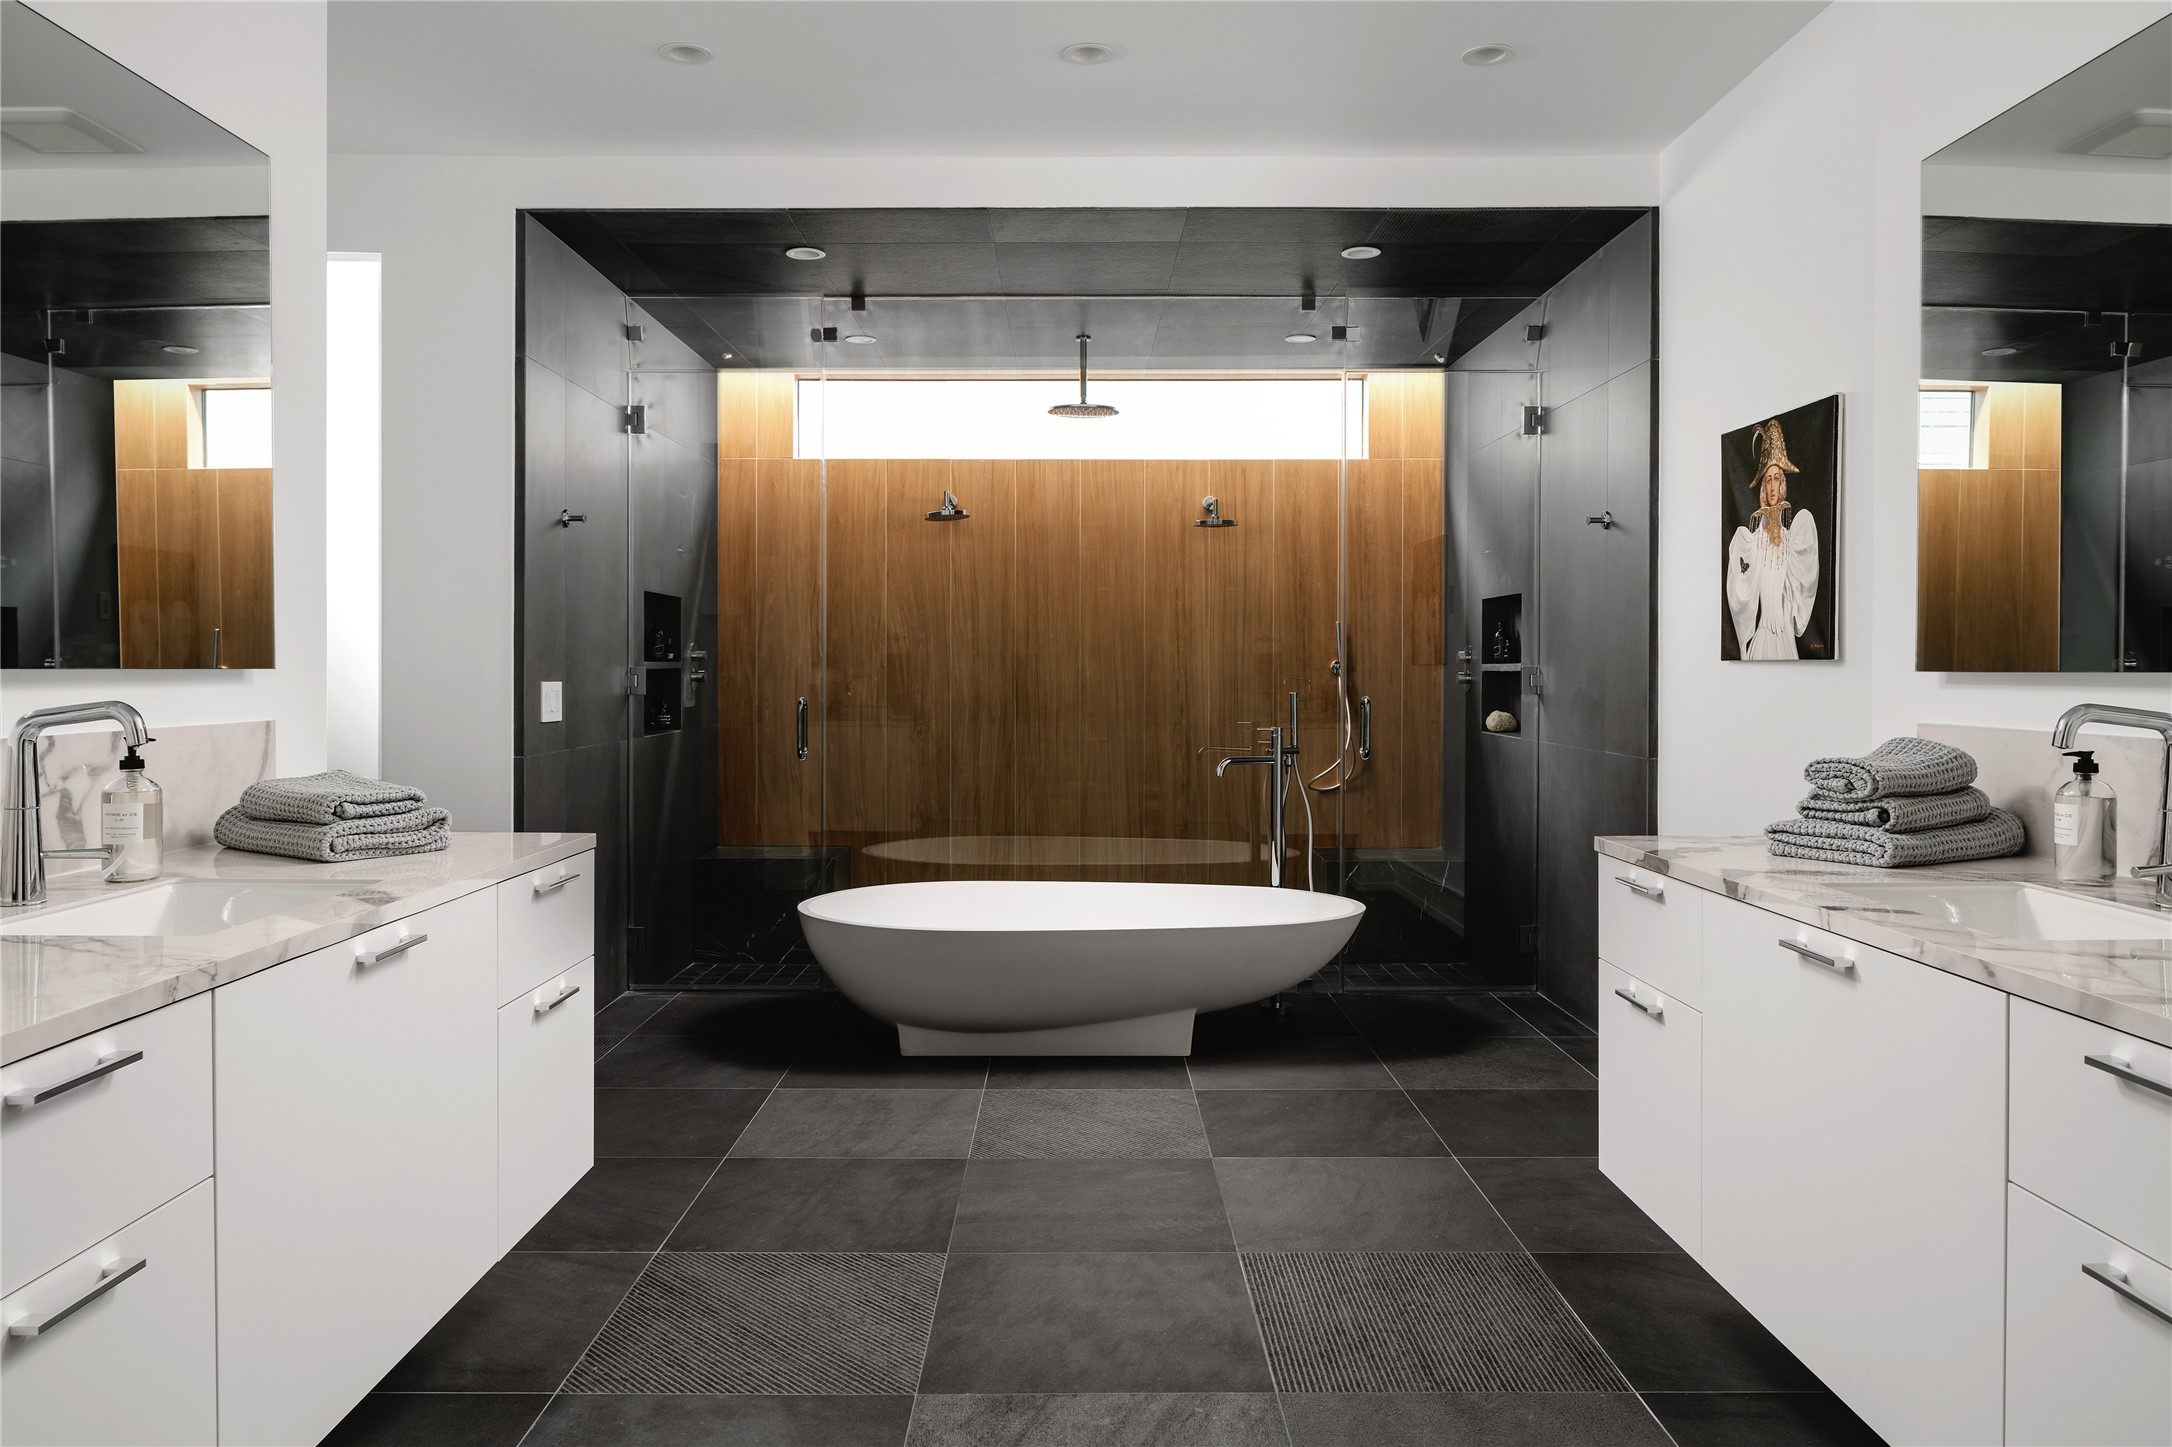 The Iconic Agape Spoon Tub situated in front of the large walk-in shower takes center stage in the en-suite primary bath. Also featured: dual water closets, porcelain counters, backlit mirrors, Italian Nobili faucets and Italian tile. Photos depict when home was previously staged